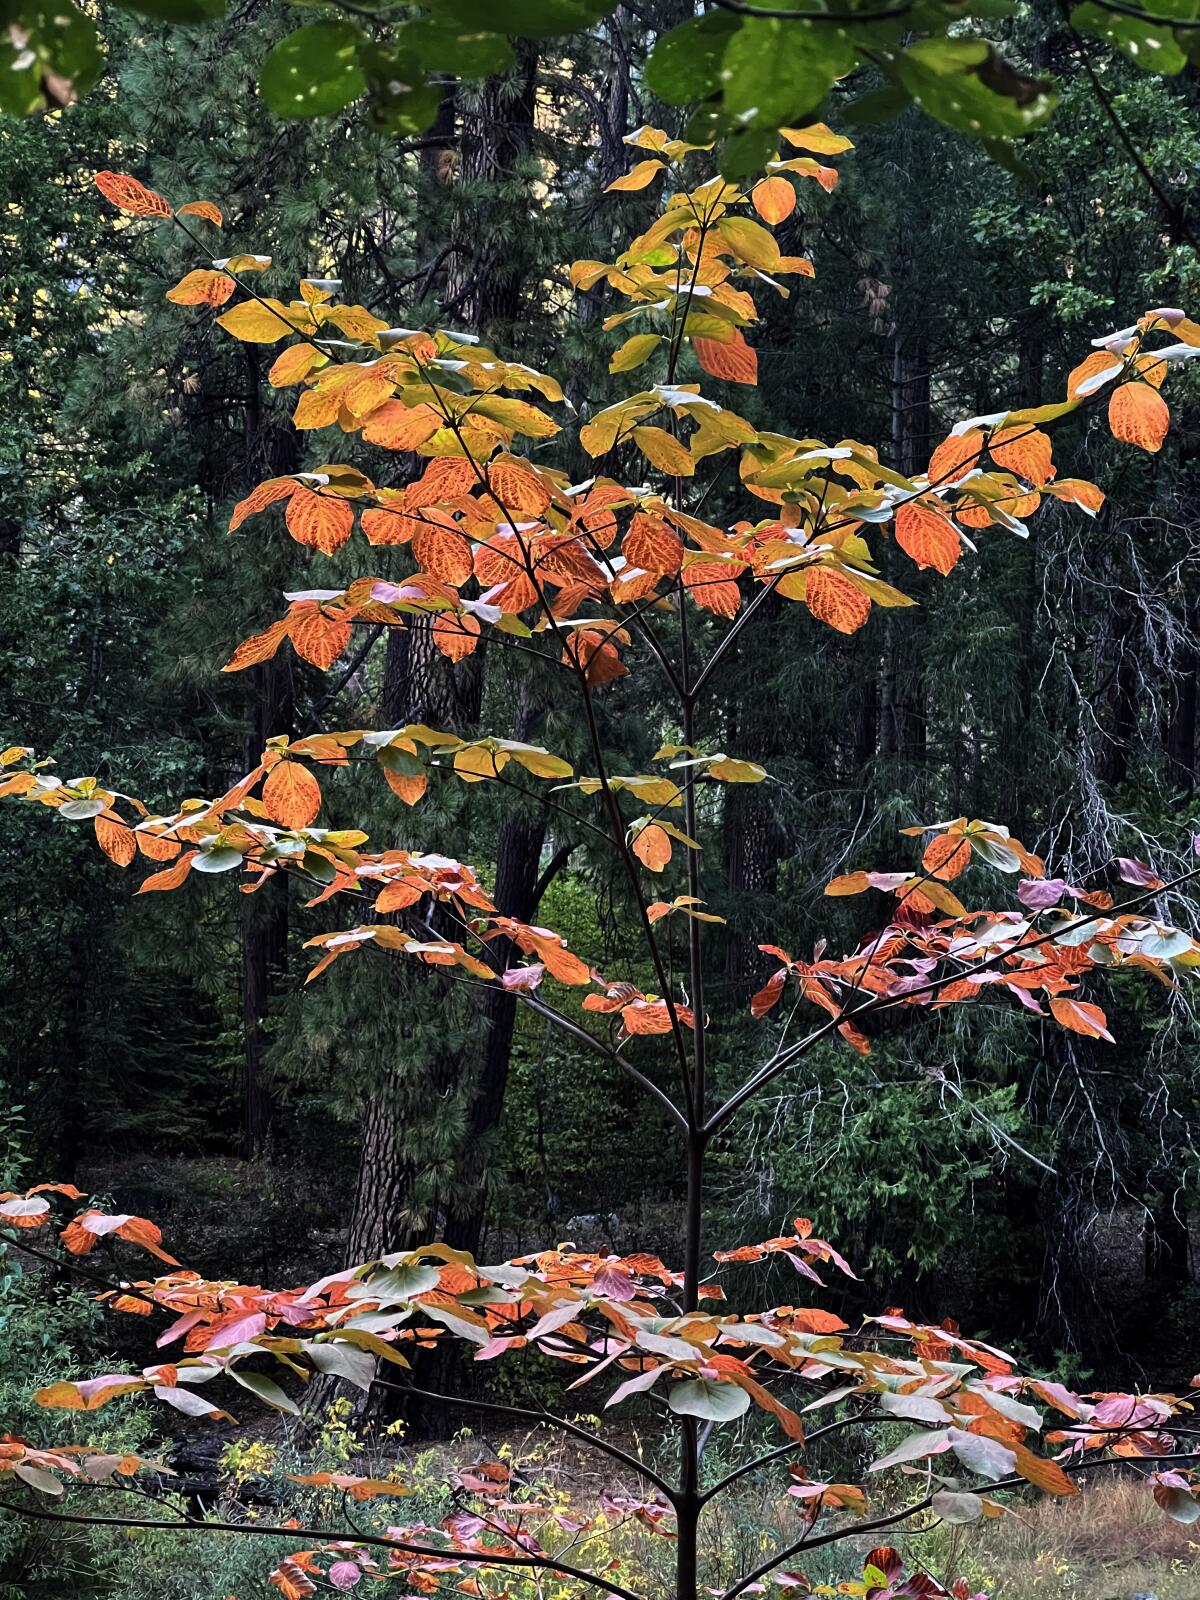 Pacific dogwood leaves turn from green to red as temperatures fall at night in Yosemite Valley.